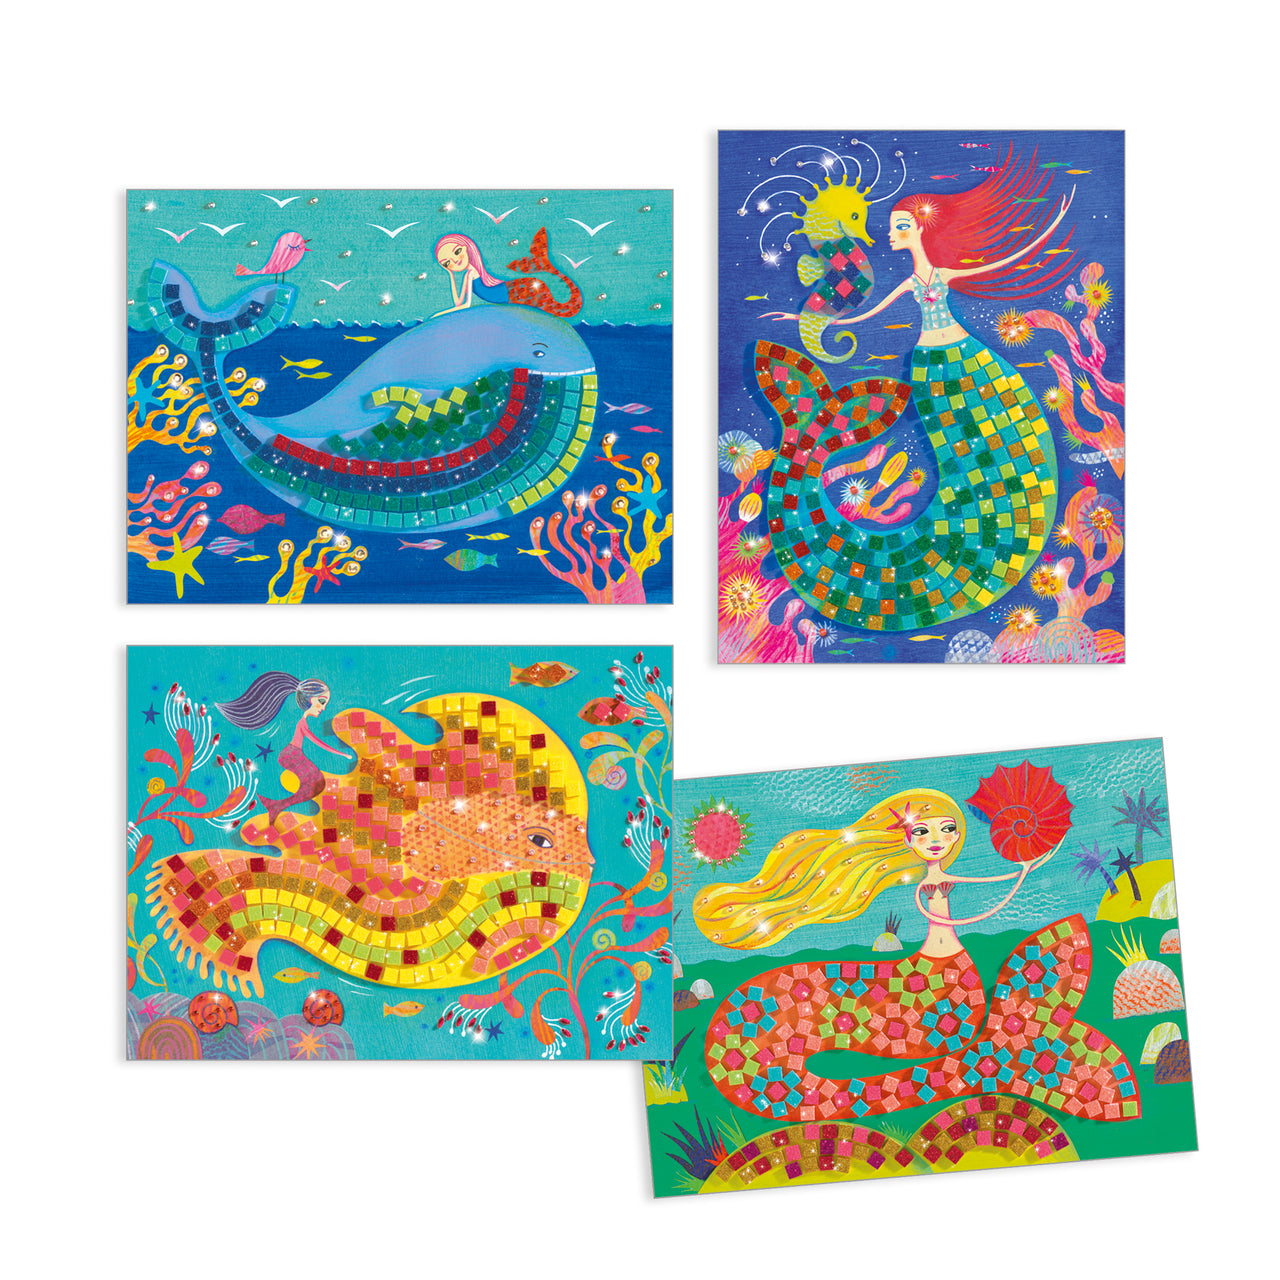 A beginners’ mosaic kit. There are 4 designs to complete with little glittery foam squares and rhinestone stickers. Children look for the numbers, then stick the pieces onto the right places on the board. As the boards are covered in decorations the mermaids appear, radiant amidst the waves.